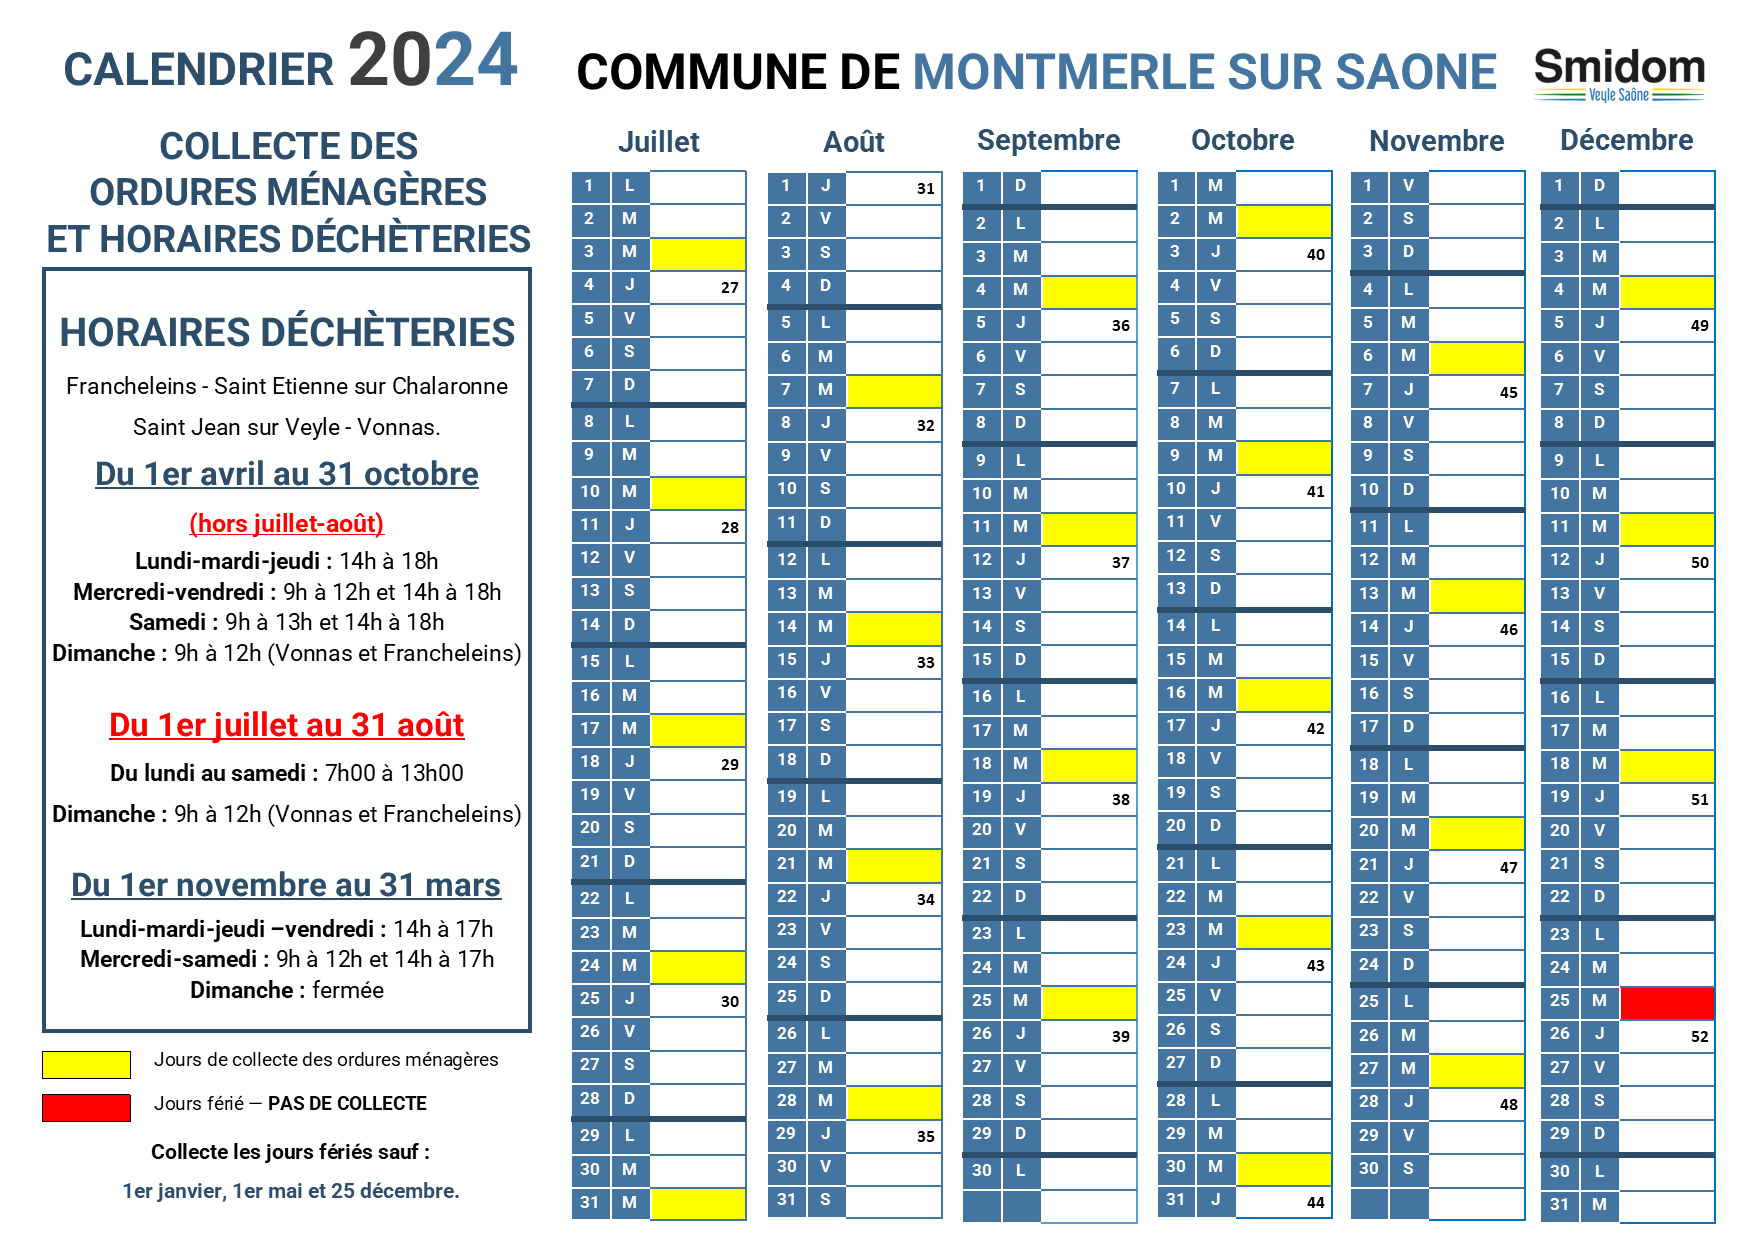 MONTMERLE SUR SAONE - Calendrier 2024 - 2.png